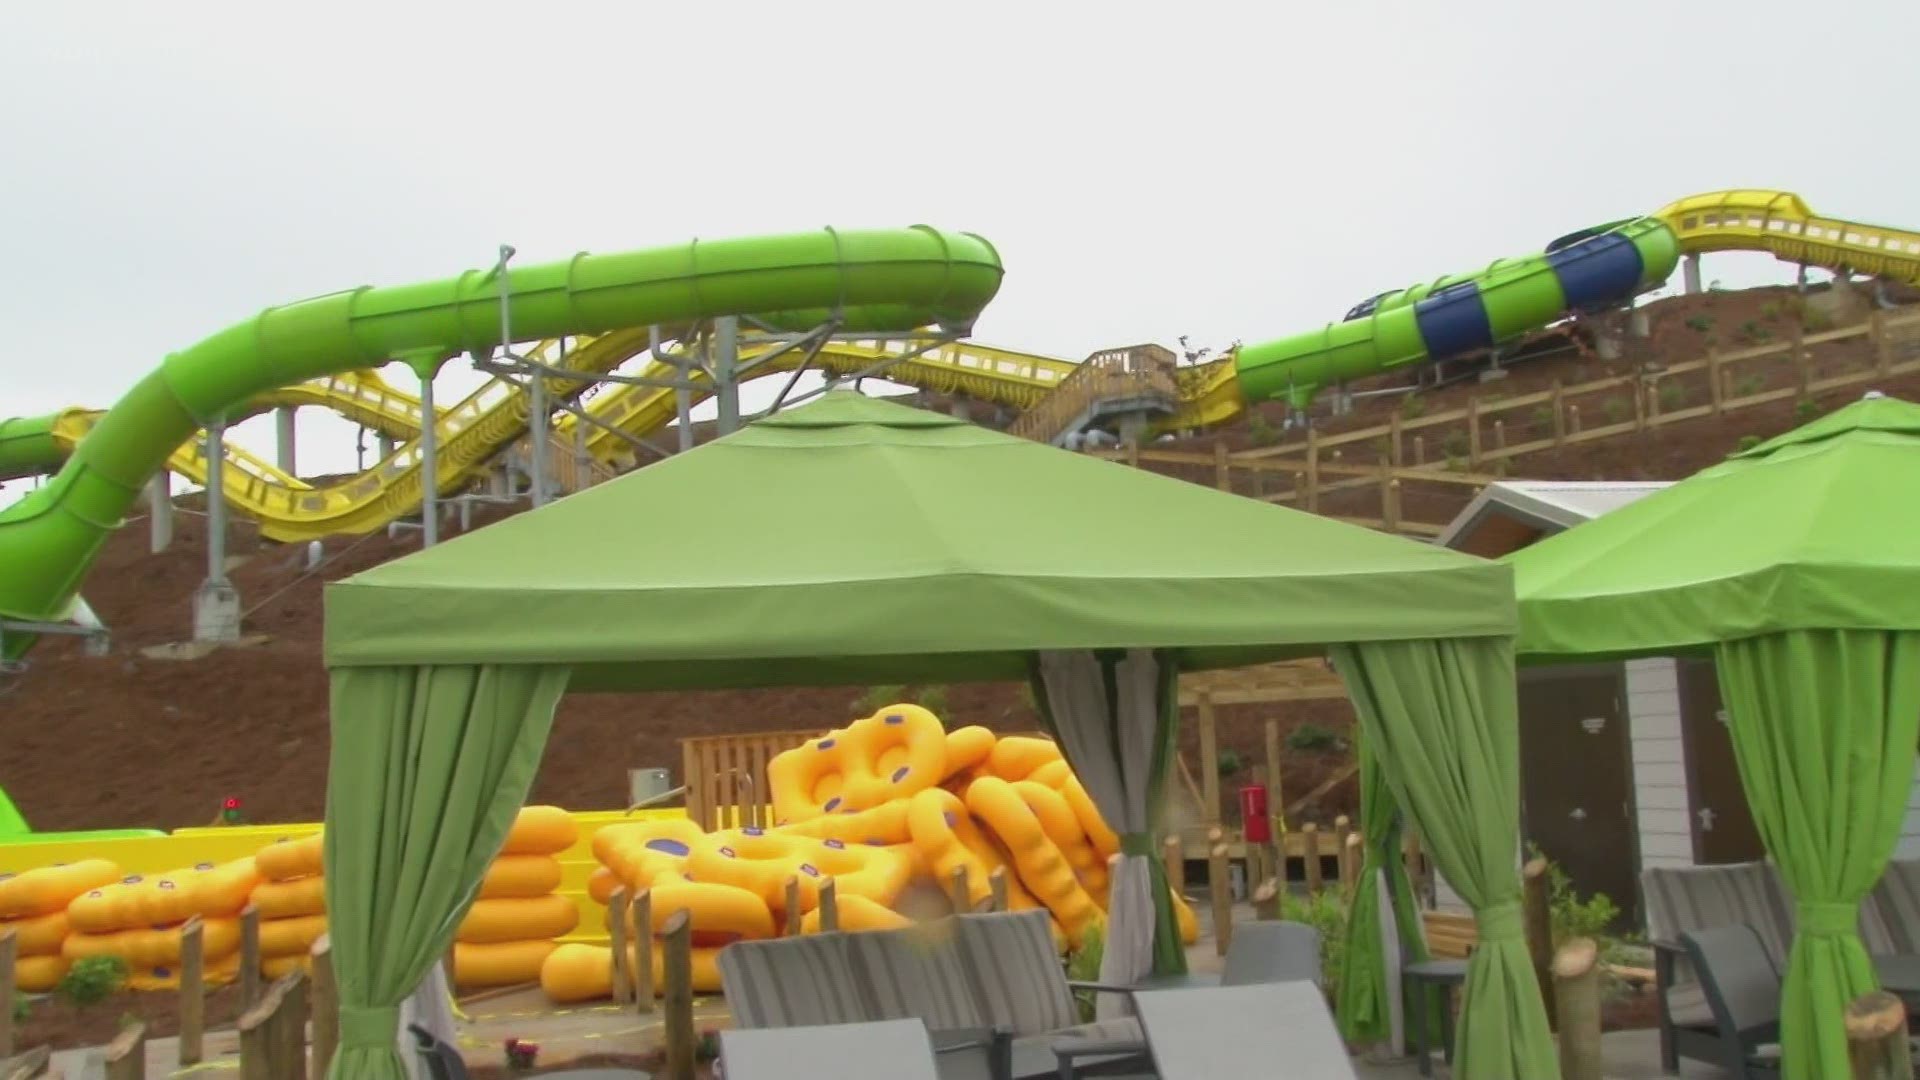 Here's more of a sneak peek inside Soaky Mountain Waterpark before it opens this weekend.